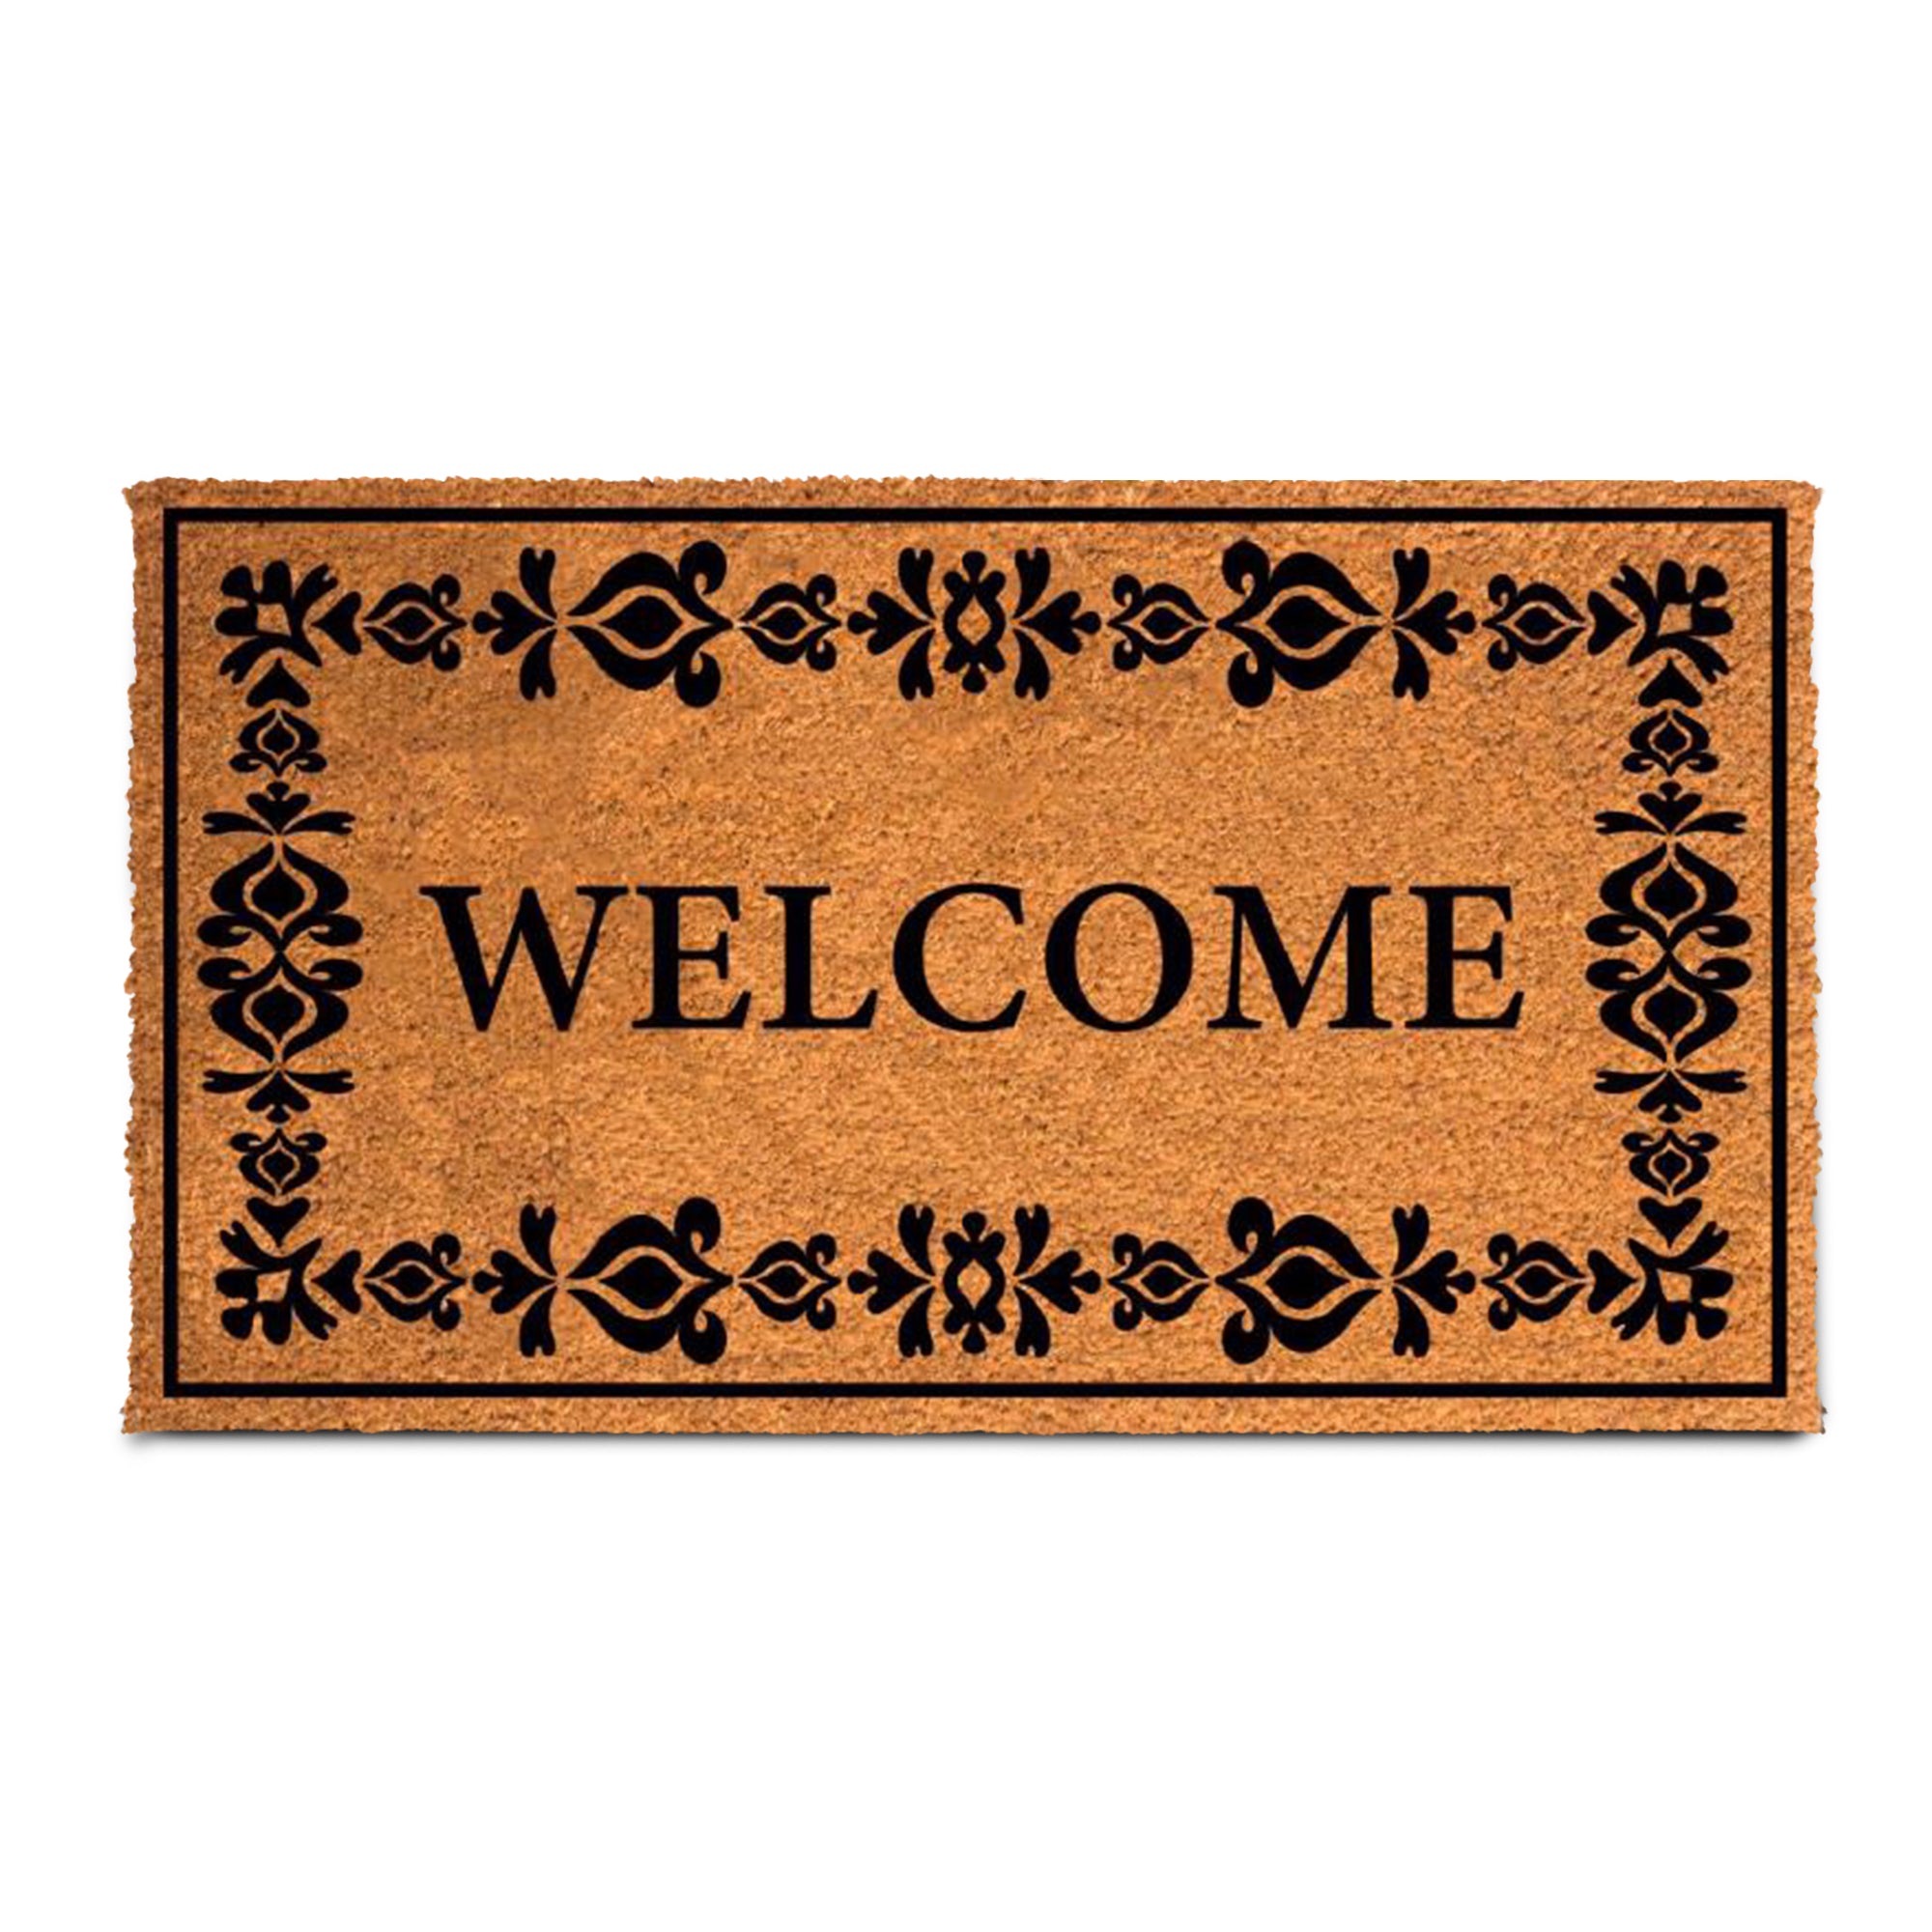 PLUS Haven Coco Coir Door Mat with Heavy Duty Backing, Welcome Doormat,  17.5”x30” Size, Easy to Clean Entry Mat, Beautiful Color and Sizing for